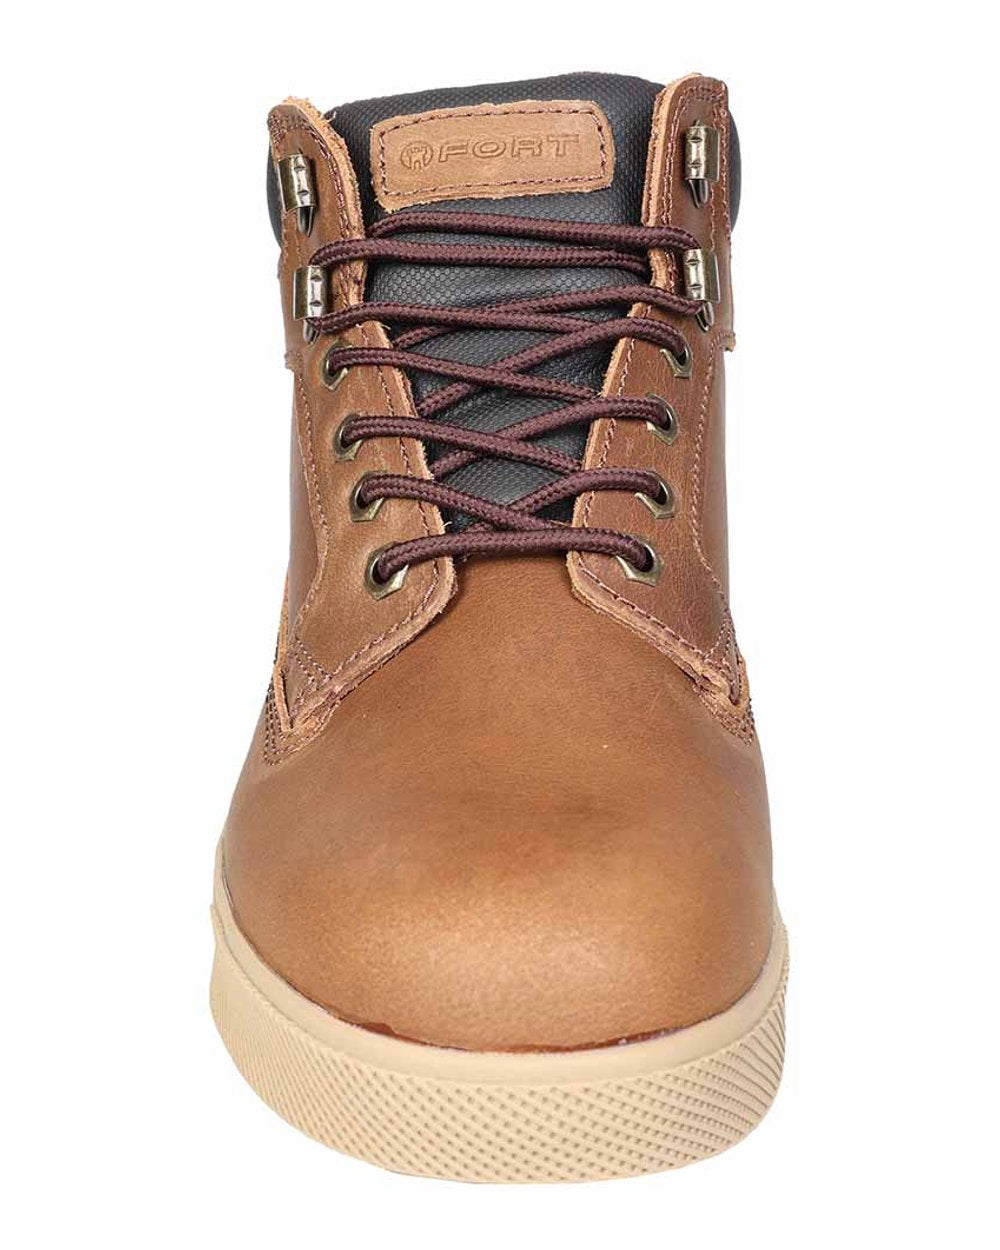 Brown coloured Fort Compton Safety Boots on white background 